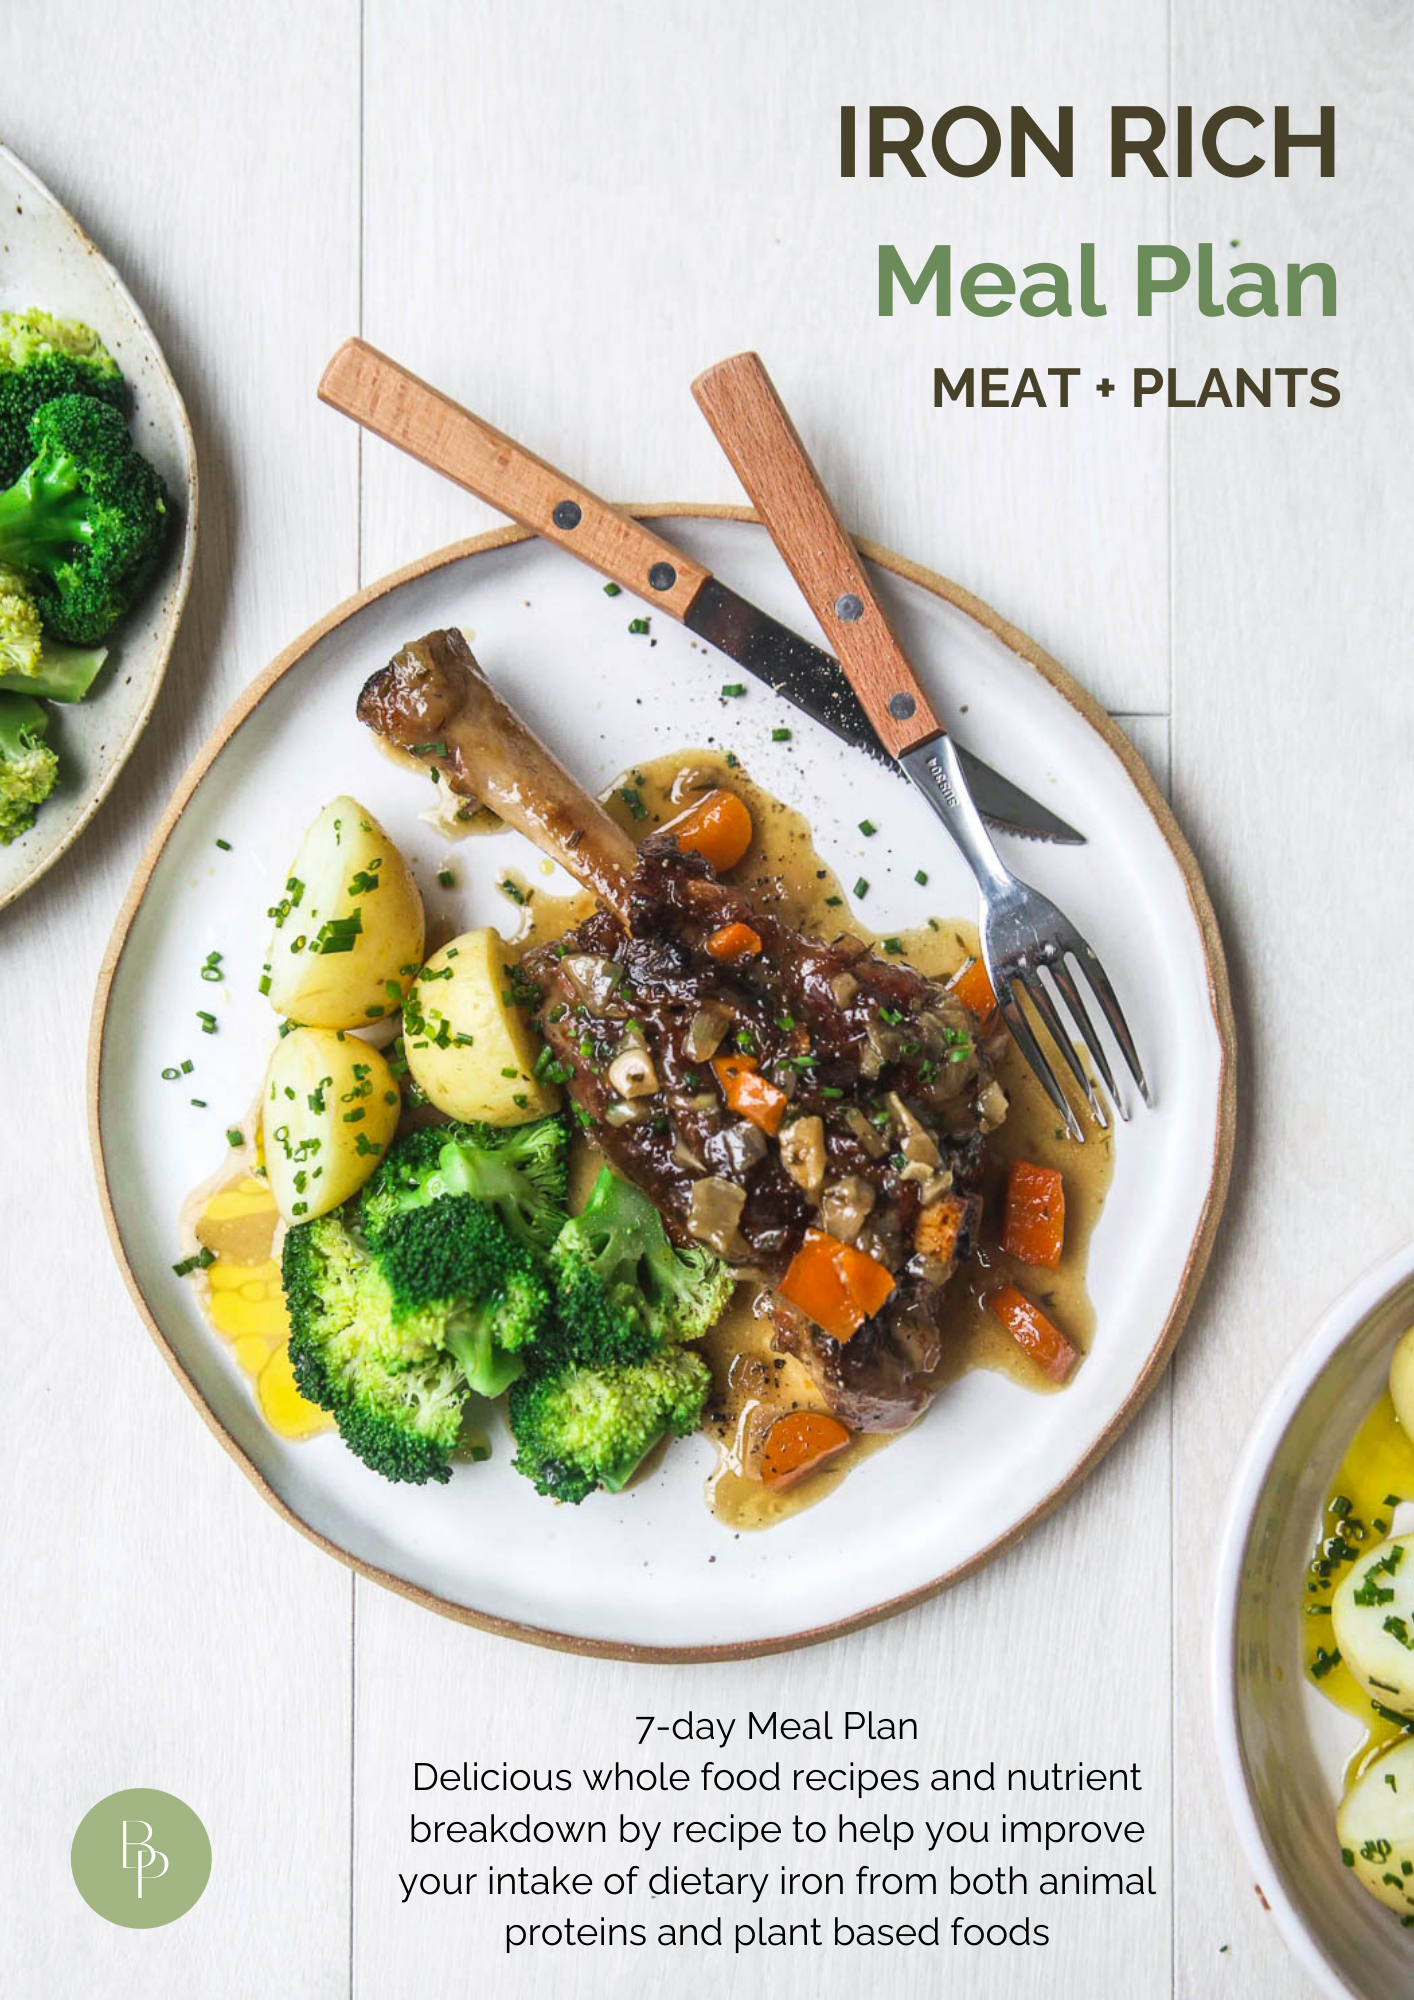 IRON RICH MEAL PLAN : MEAT AND PLANTS